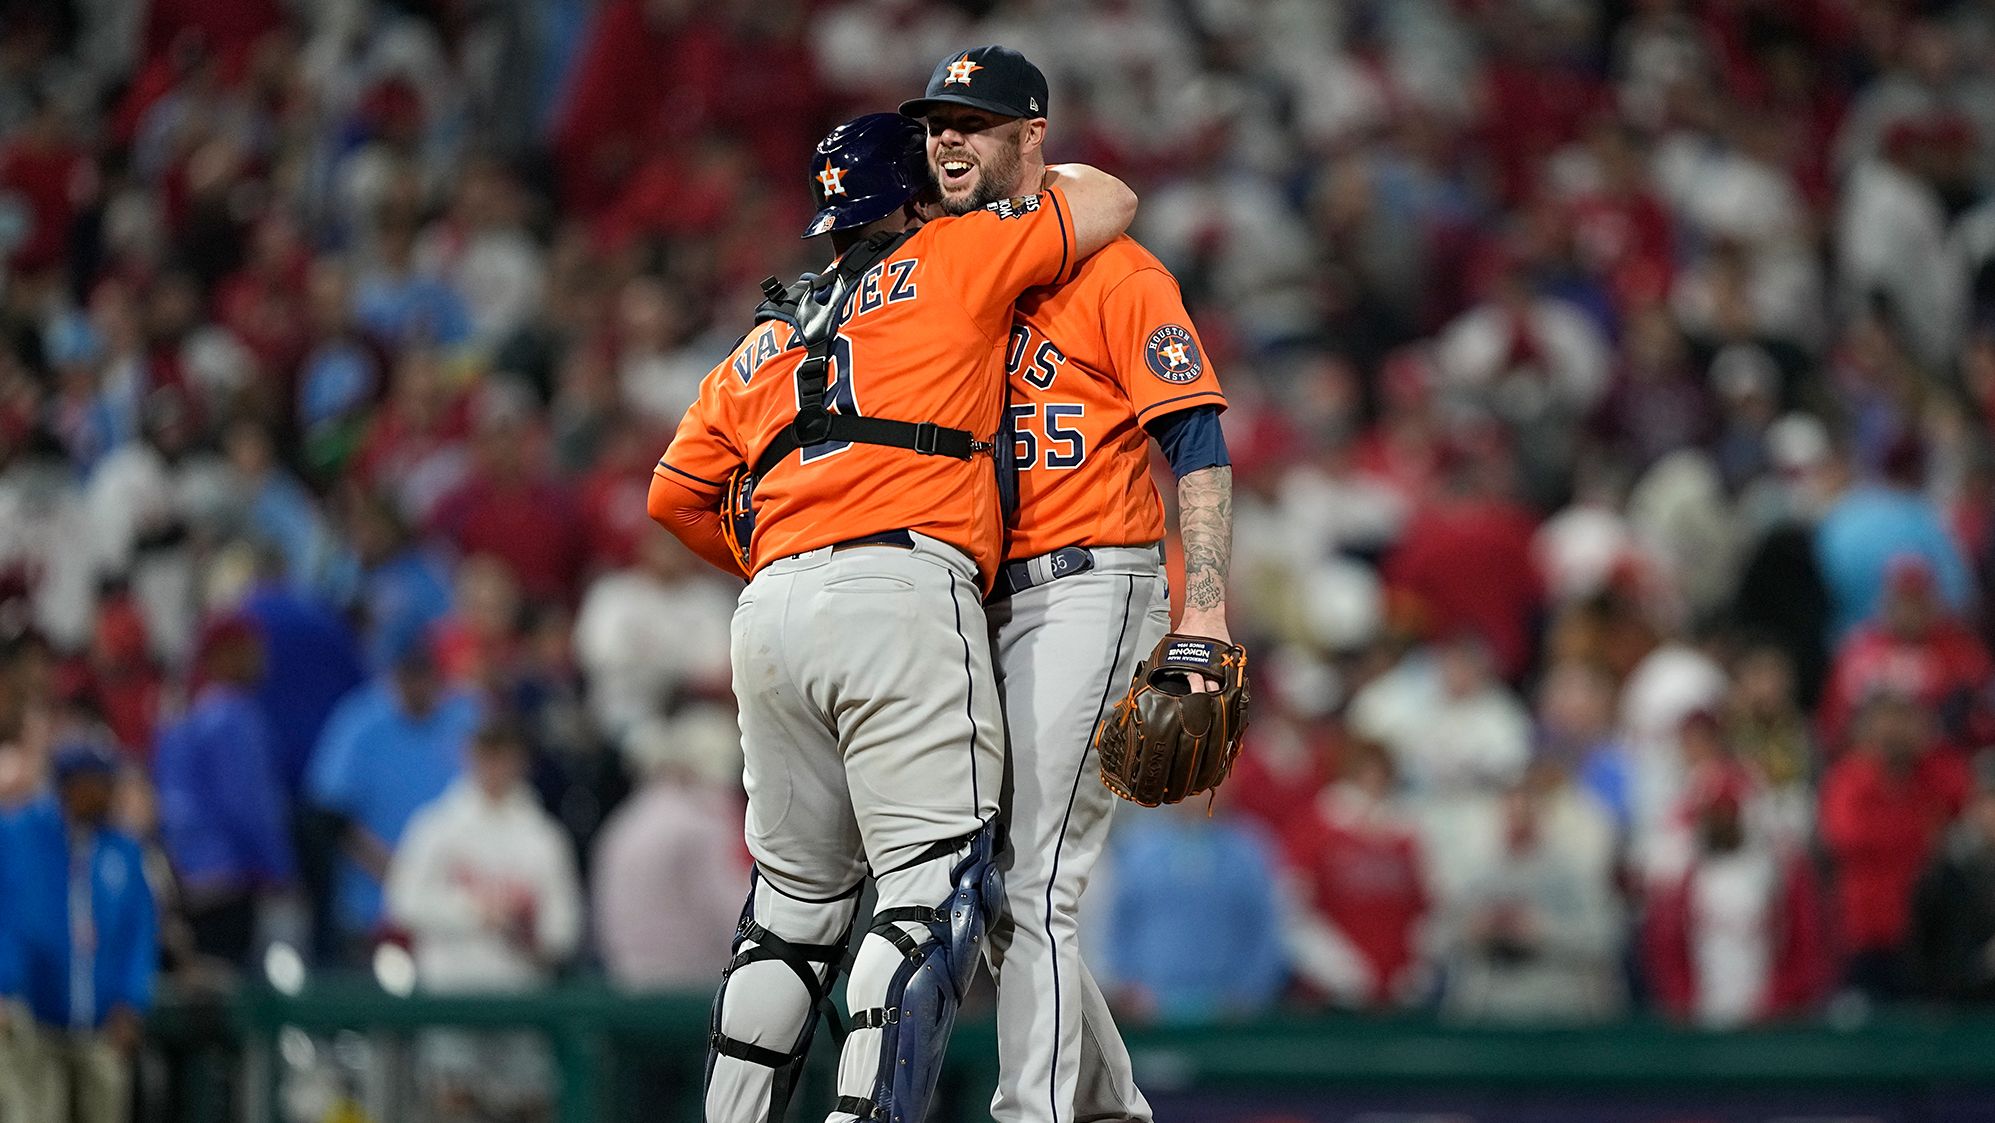 Houston Astros relief pitcher Ryan Pressly and catcher Christian Vazquez celebrate their win over the Philadelphia Phillies in Game 4 of <a href="https://www.cnn.com/2022/10/28/sport/gallery/world-series-2022" target="_blank">the World Series</a> on Wednesday, November 2, in Philadelphia. For just the second time in World Series history, <a href="https://www.cnn.com/2022/11/02/sport/astros-phillies-no-hitter-game-4-world-series-spt/index.html" target="_blank">a no-hitter was thrown</a>. The Astros won 5-0 and tie the series at 2-2.